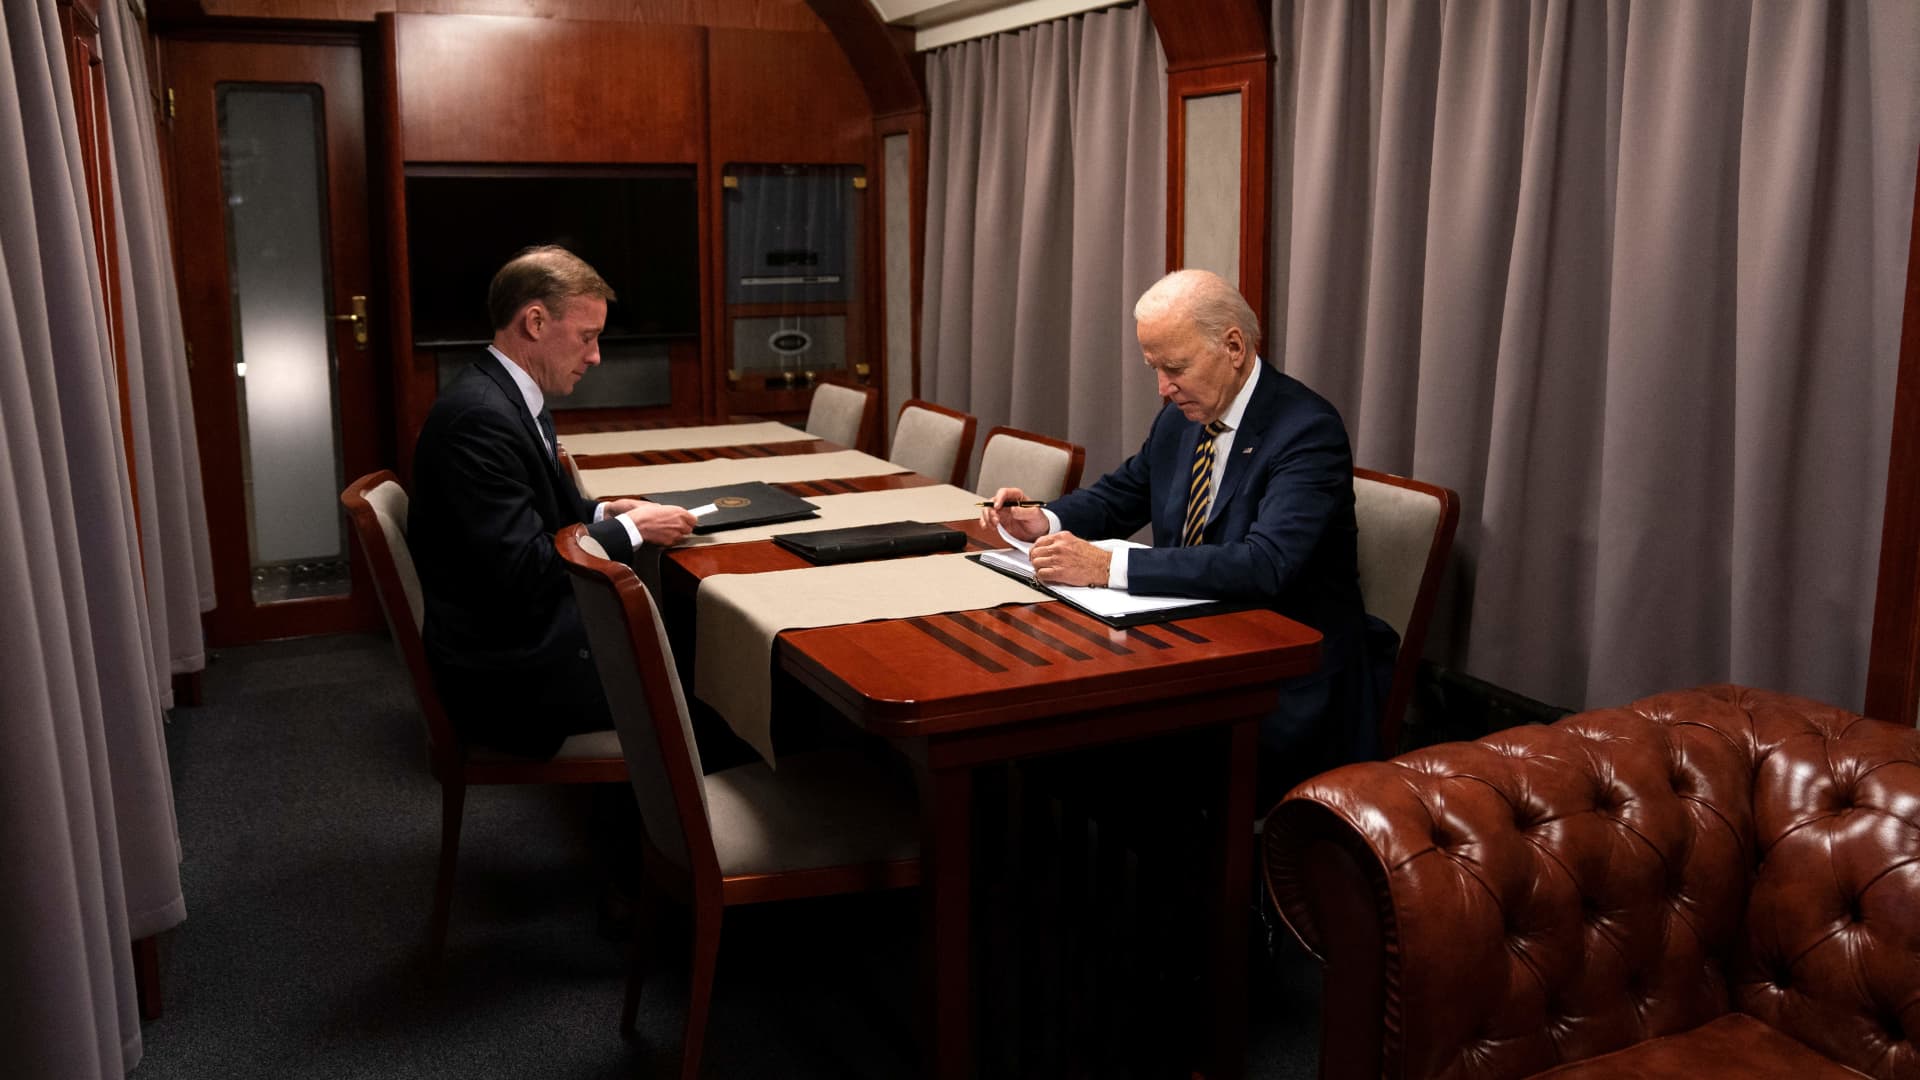 US President Joe Biden sits on a train with National Security Advisor Jake Sullivan after a surprise visit with Ukrainian President Volodymyr Zelenskyy, in Kyiv on February 20, 2023. (Photo by Evan Vucci / POOL / AFP) (Photo by EVAN VUCCI/POOL/AFP via Getty Images)